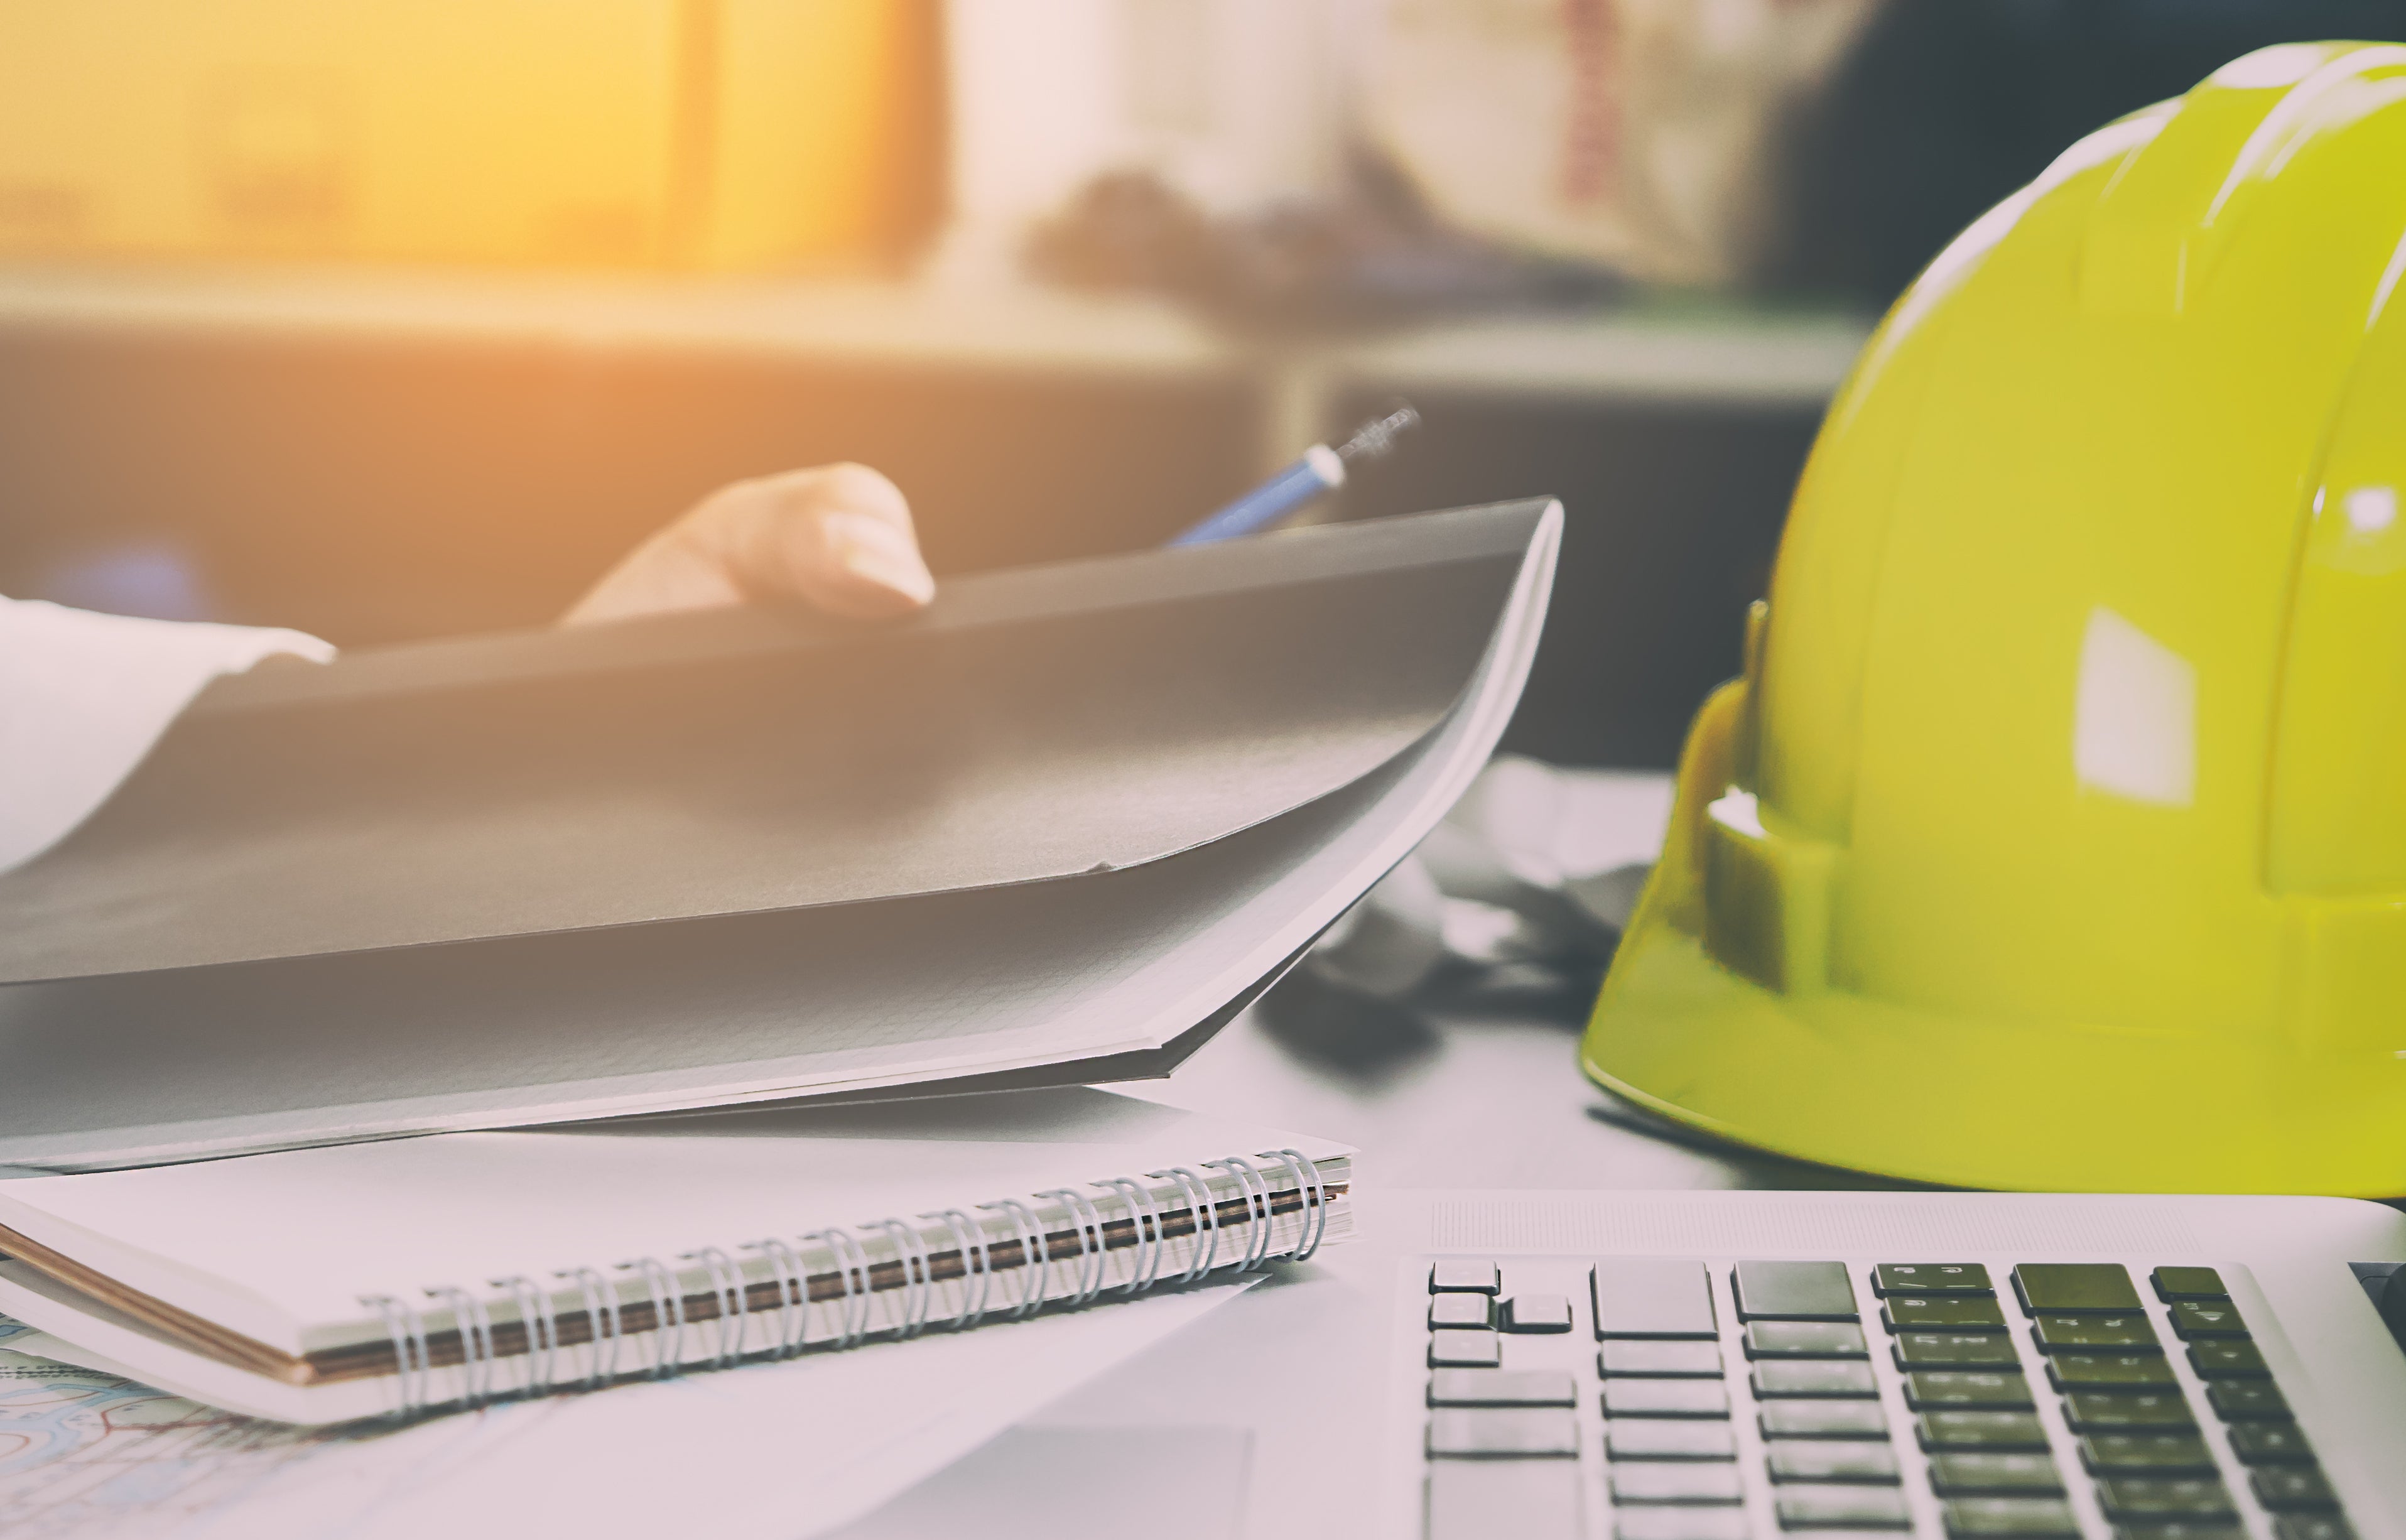 A hardhat and notebook to represent health and safety at work